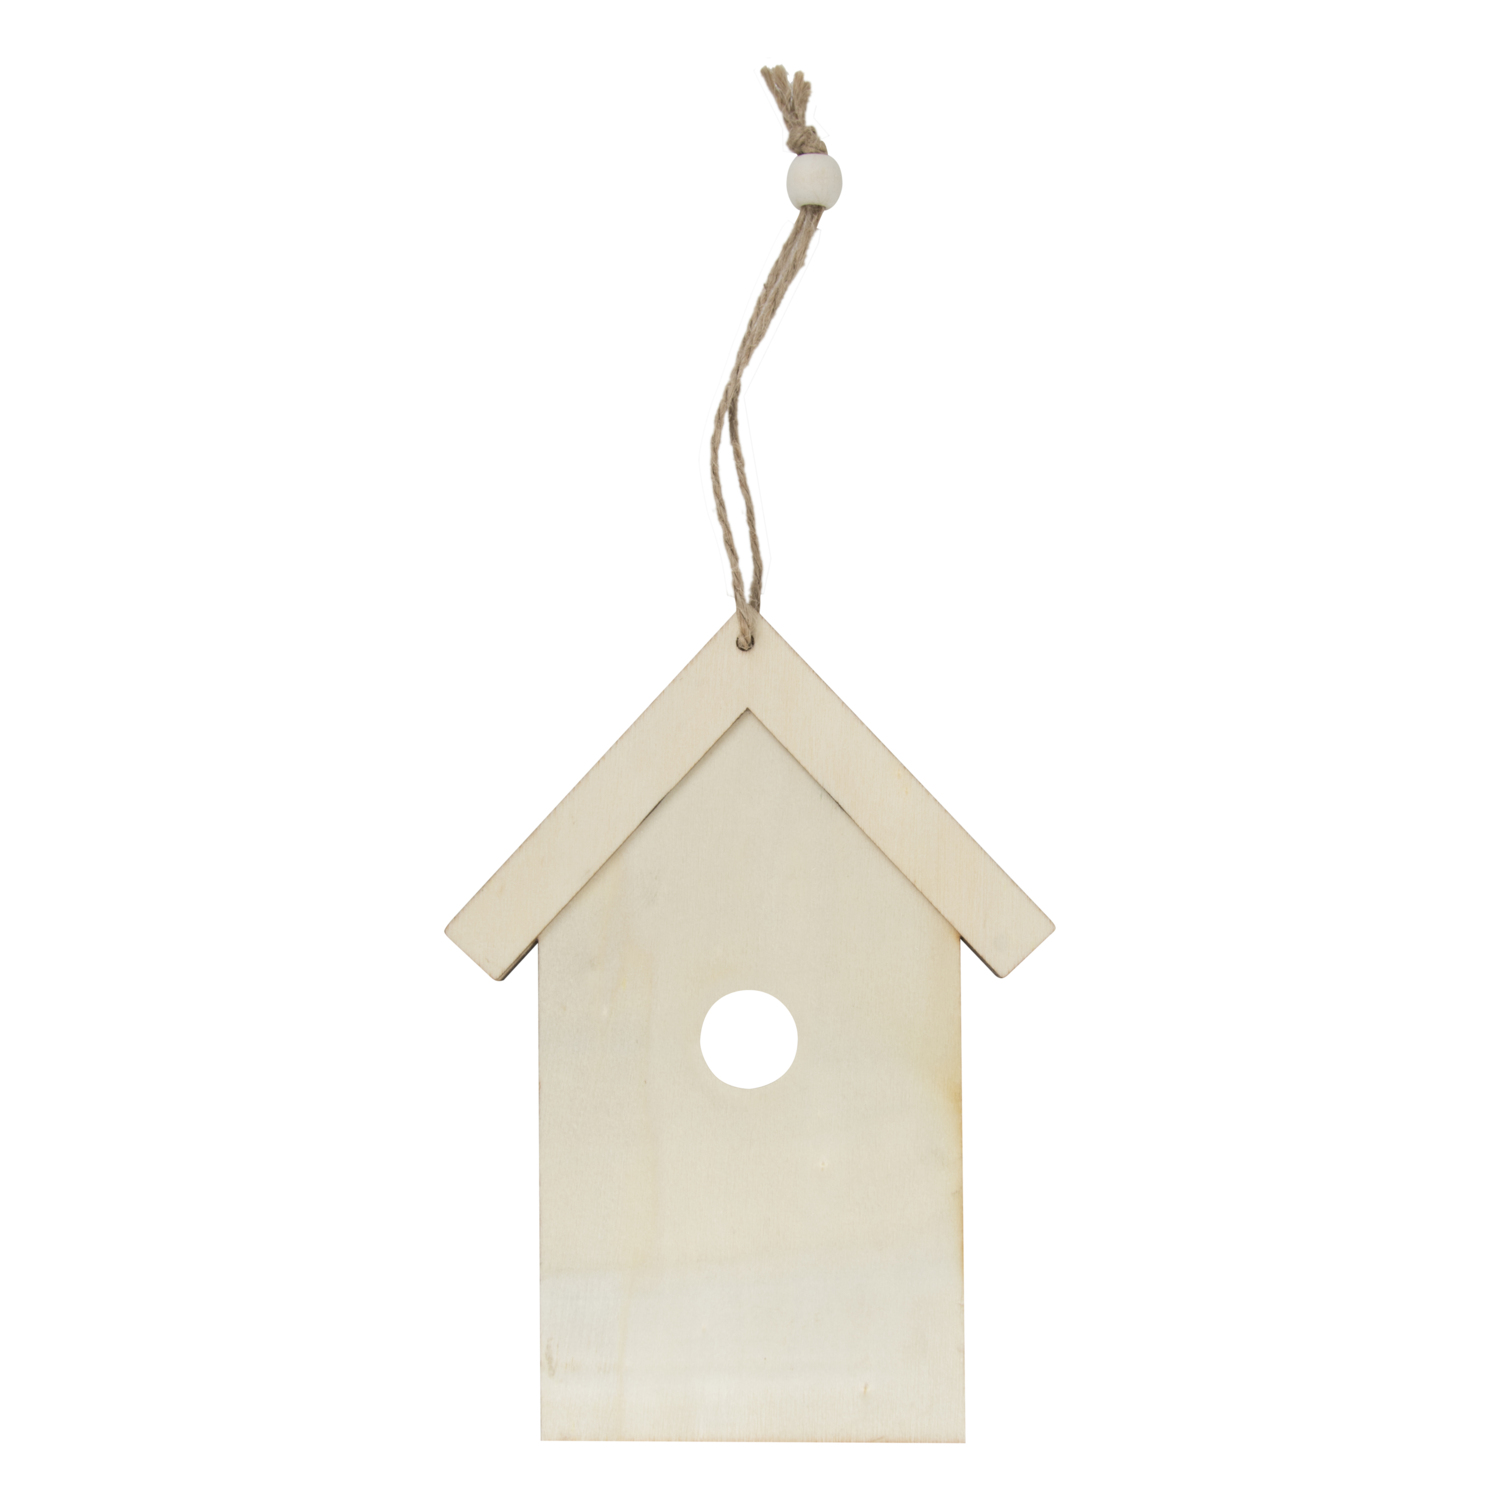 Wooden Ornament Hanging Decoration Image 1